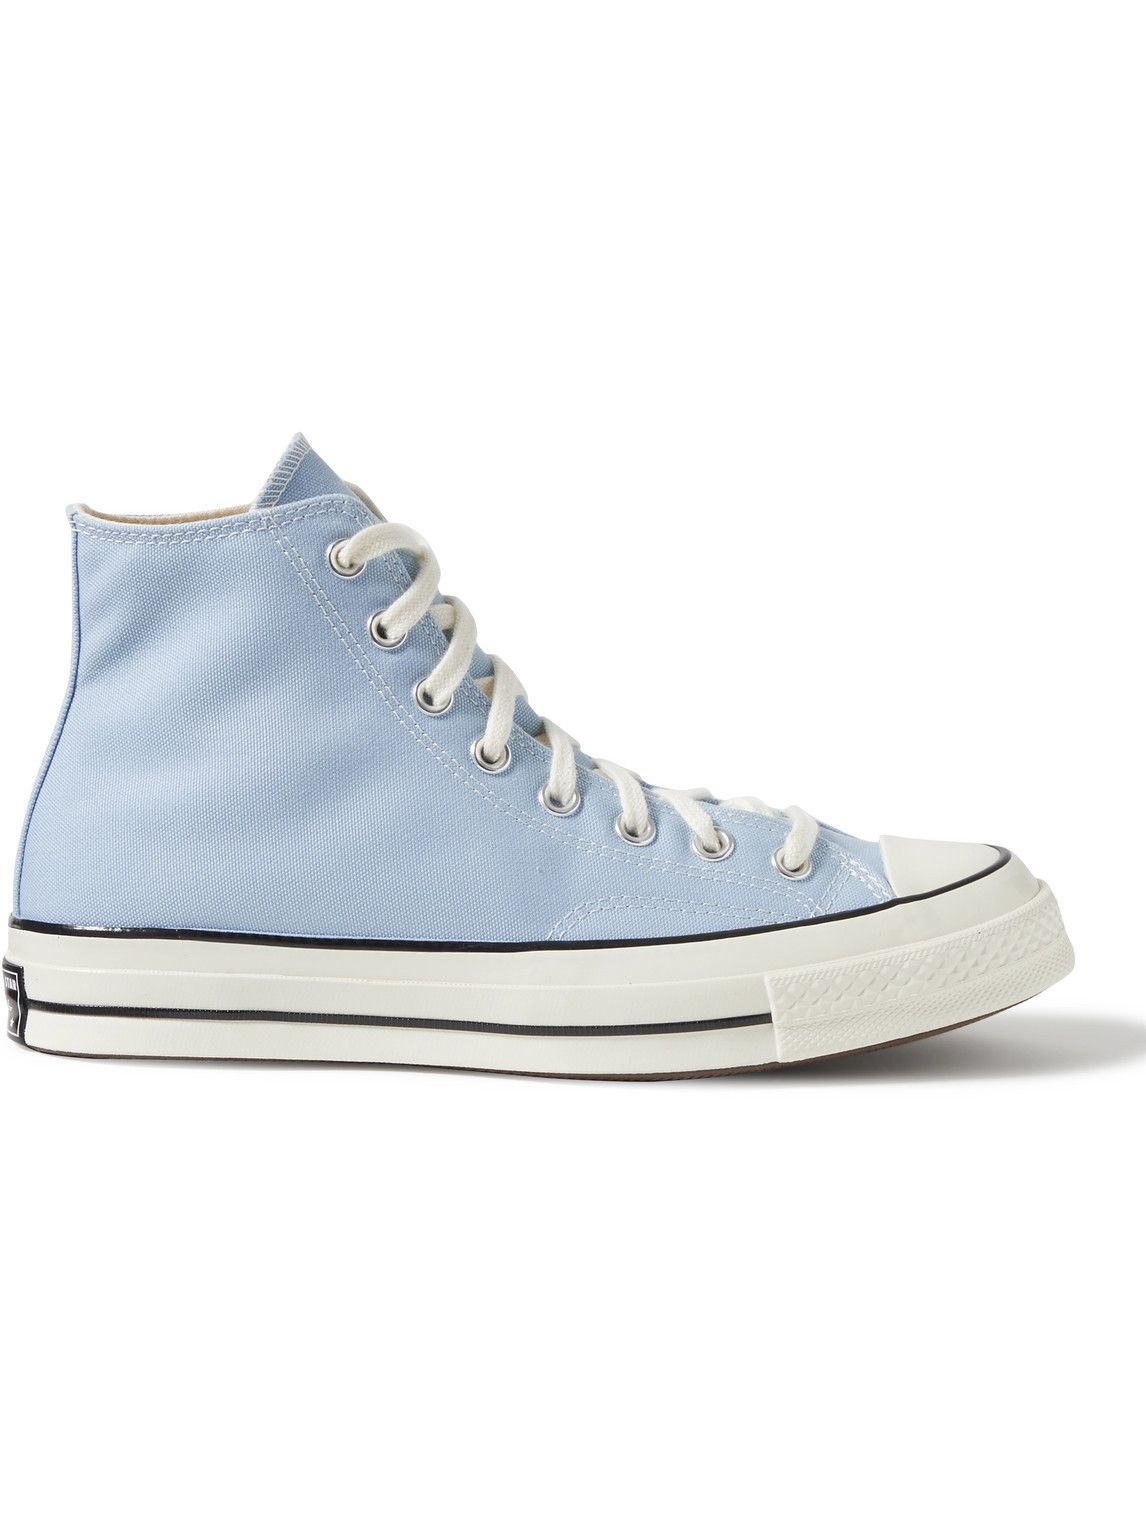 Converse - Chuck 70 Recycled Canvas High-Top Sneakers - Blue Converse